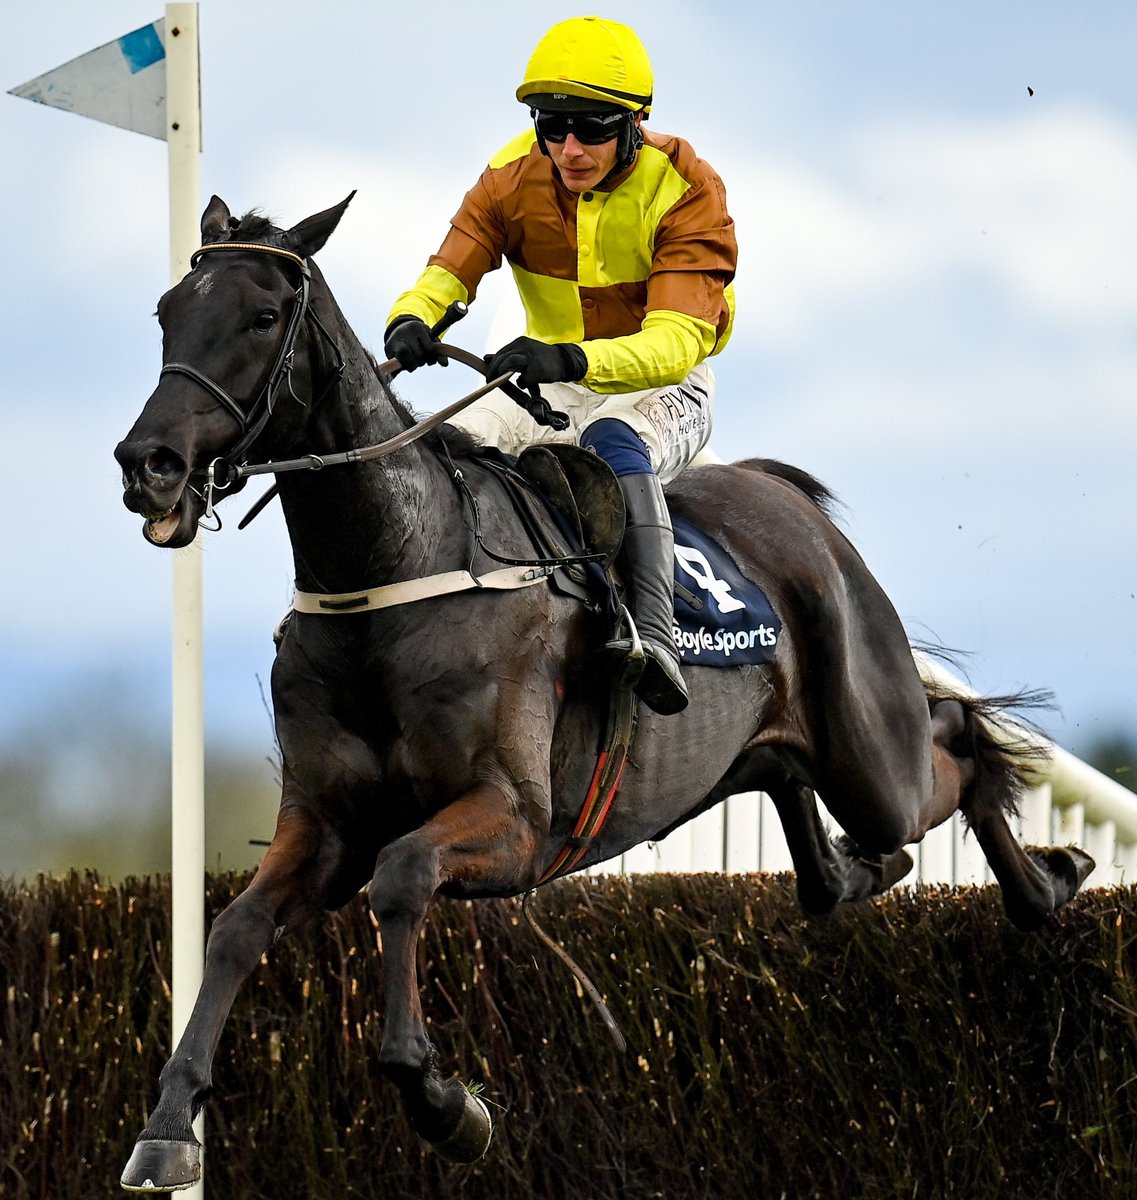 Watch Cheltenham Gold Cup fancy Galopin Des Champs in the John Durkan Chase this Monday at 2.10pm on @rtenews Channel The RTÉ News channel is available to stream on @RTEplayer Or... Saorview - Channel 21 Virgin Media - Channel 200 Sky - Channel 517 Eir - Channel 517 #rteracing